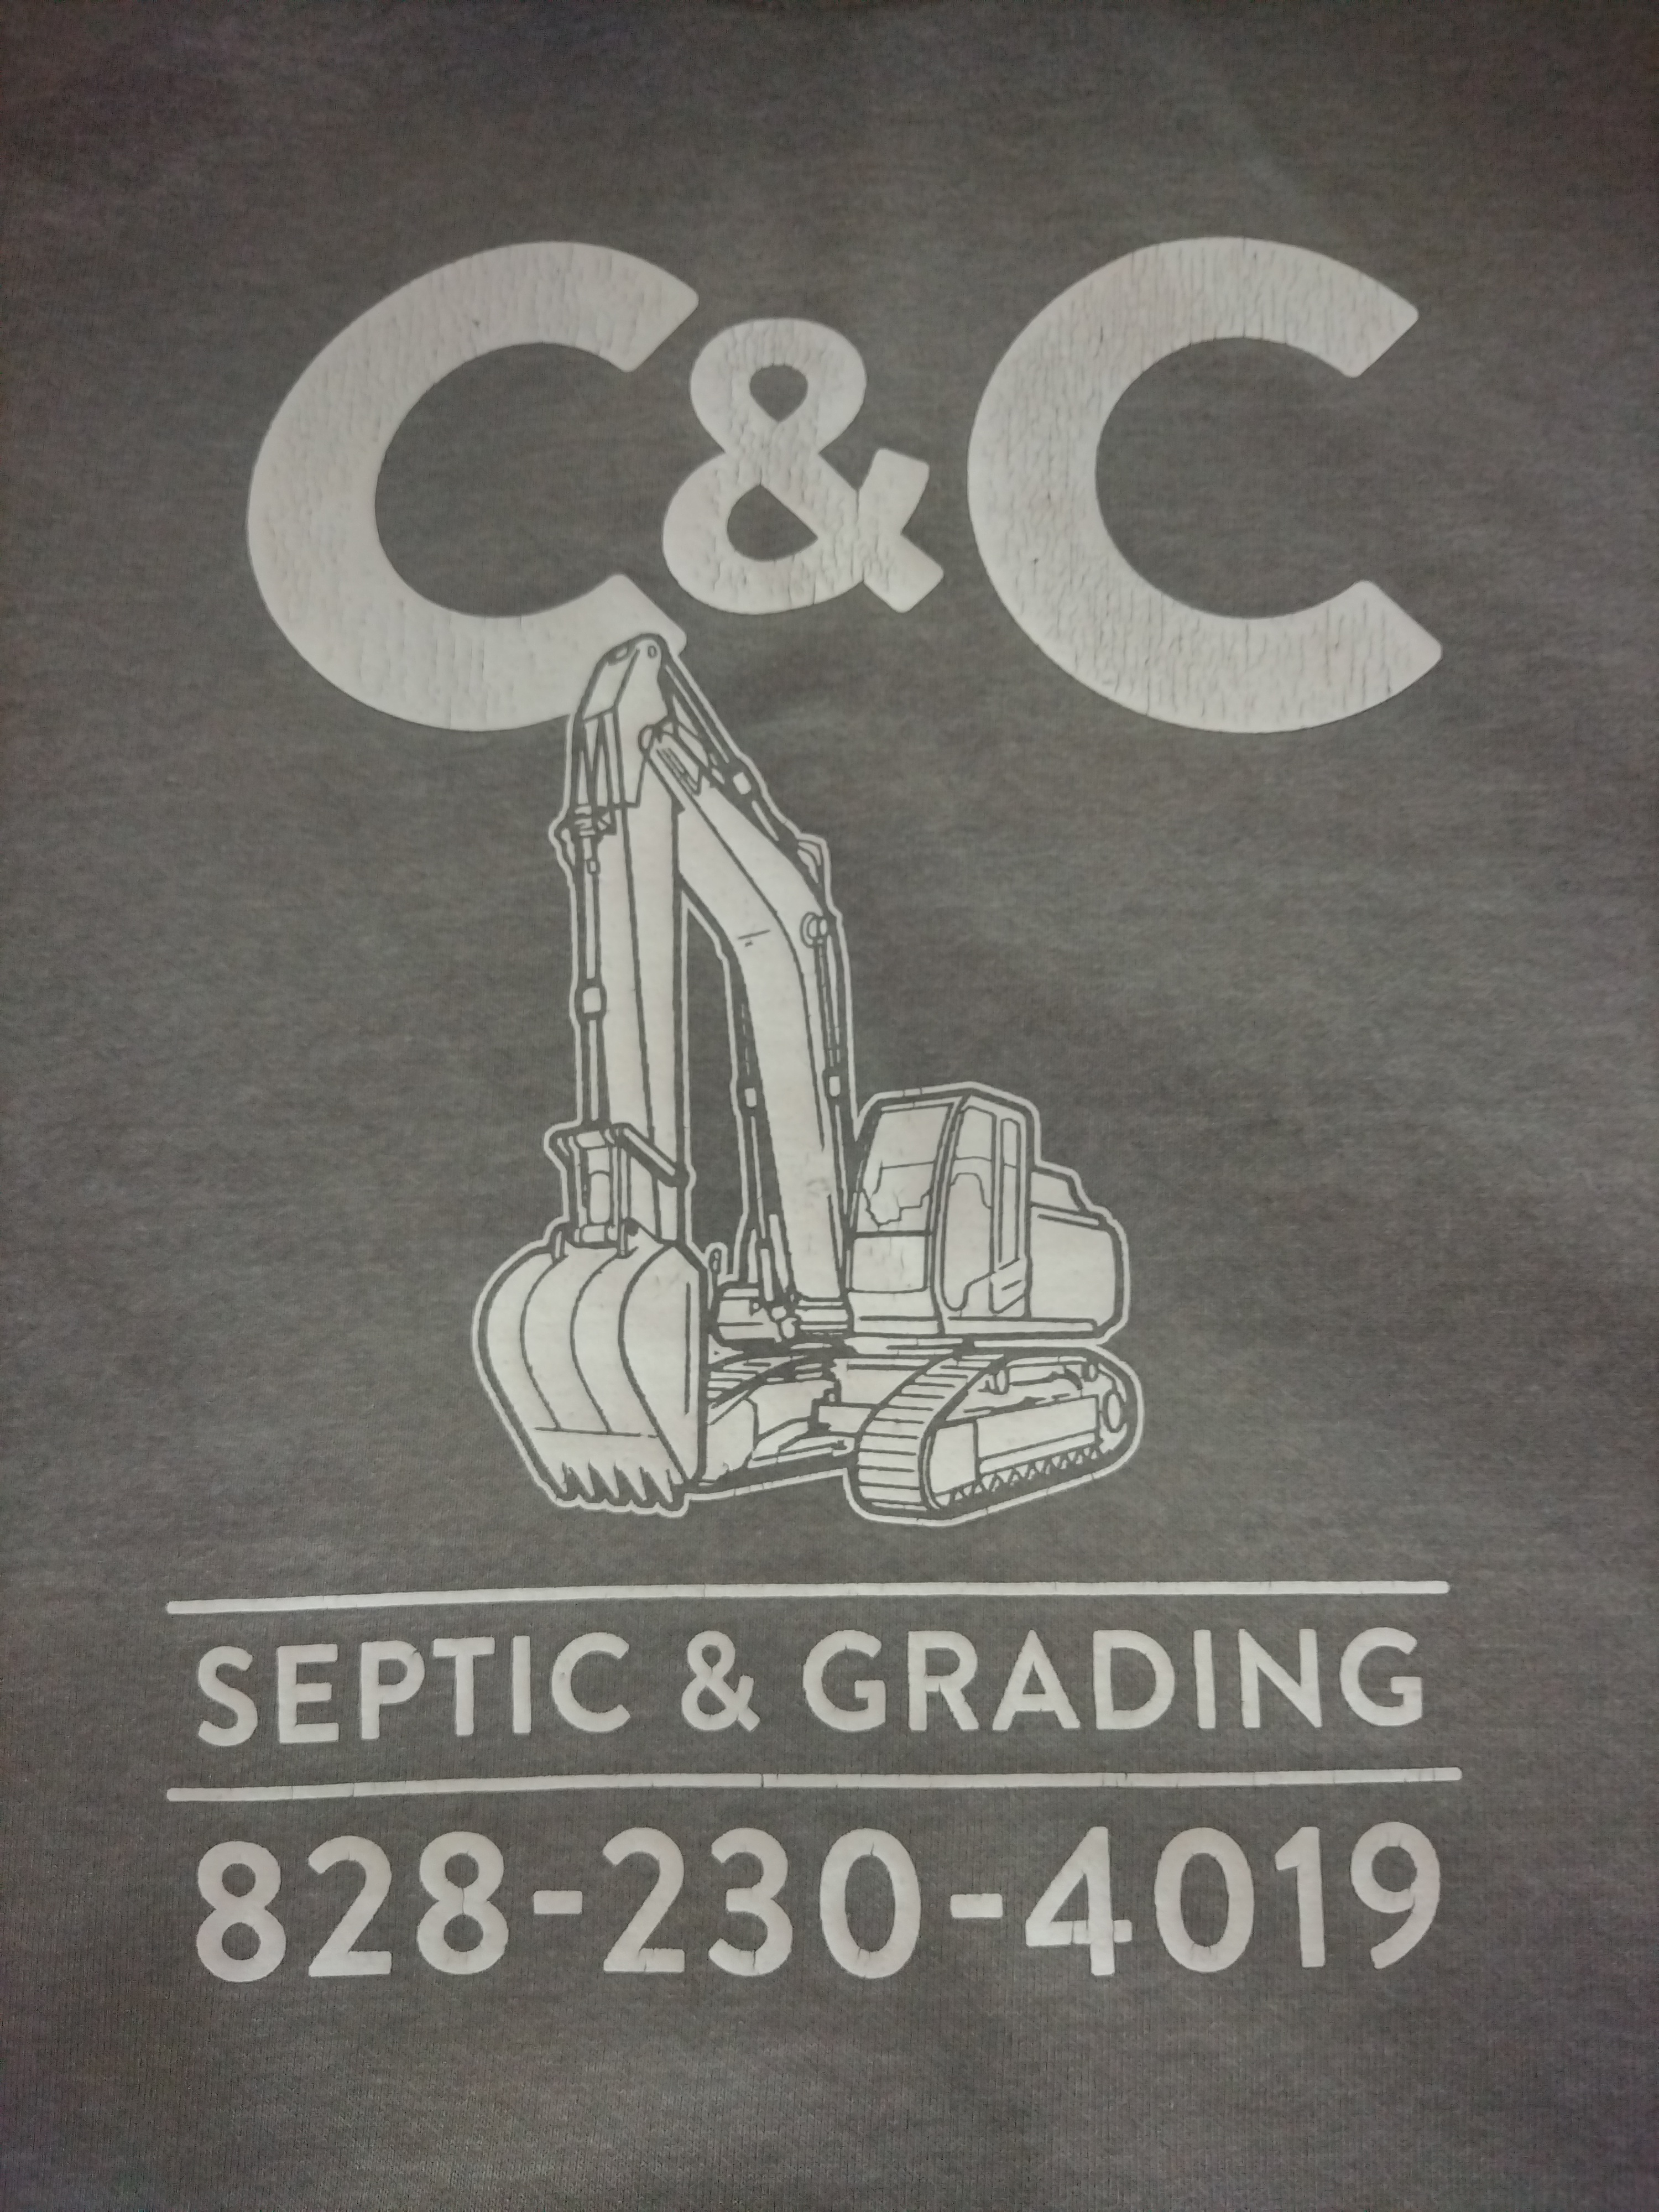 C & C Septic and Grading Logo